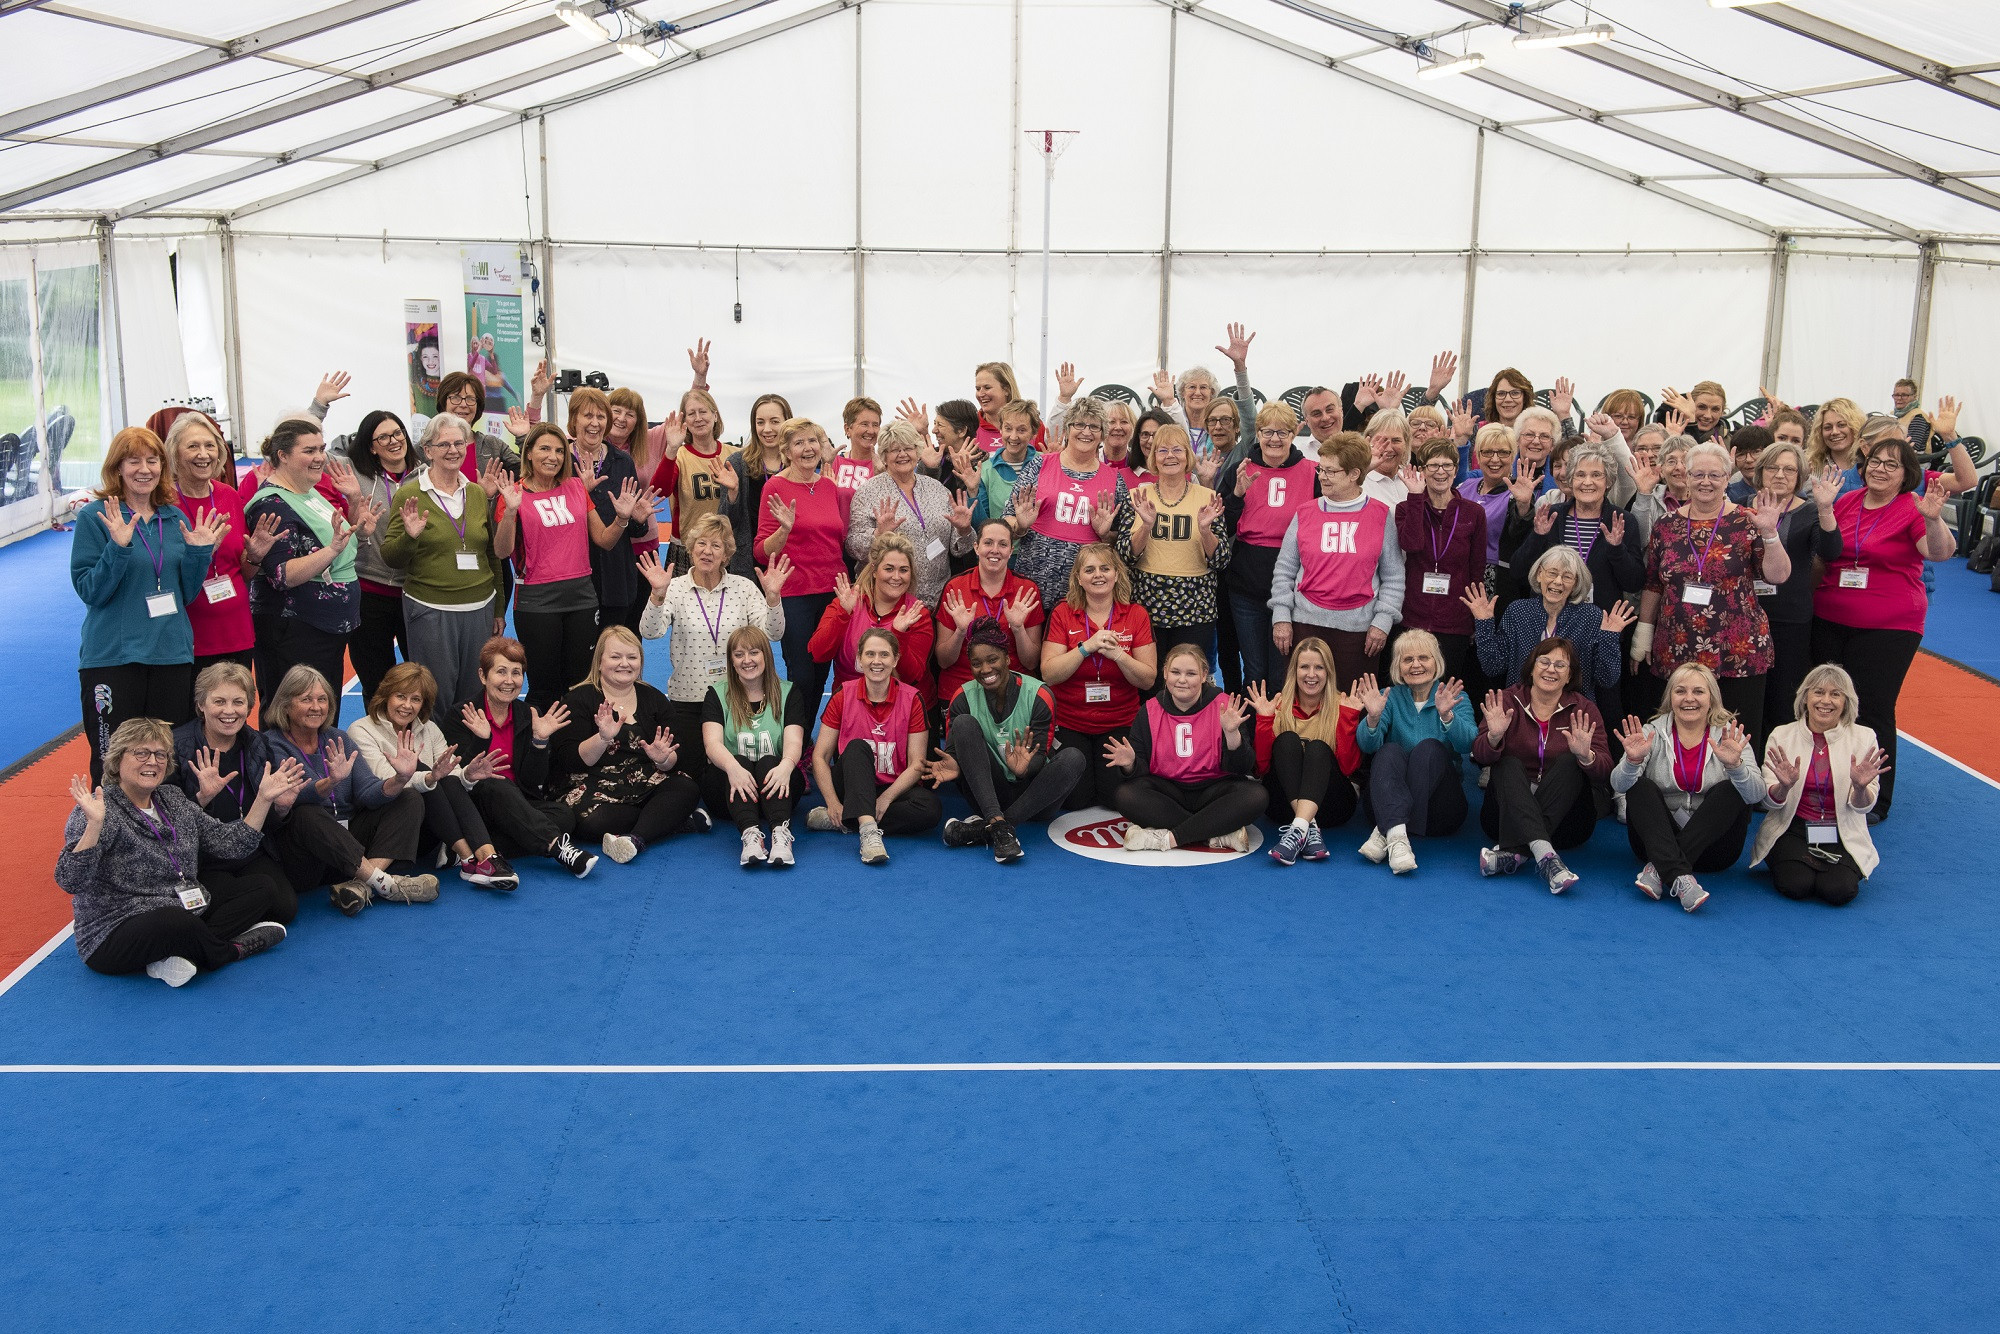 A celebration event was held in Oxfordshire ©England Netball